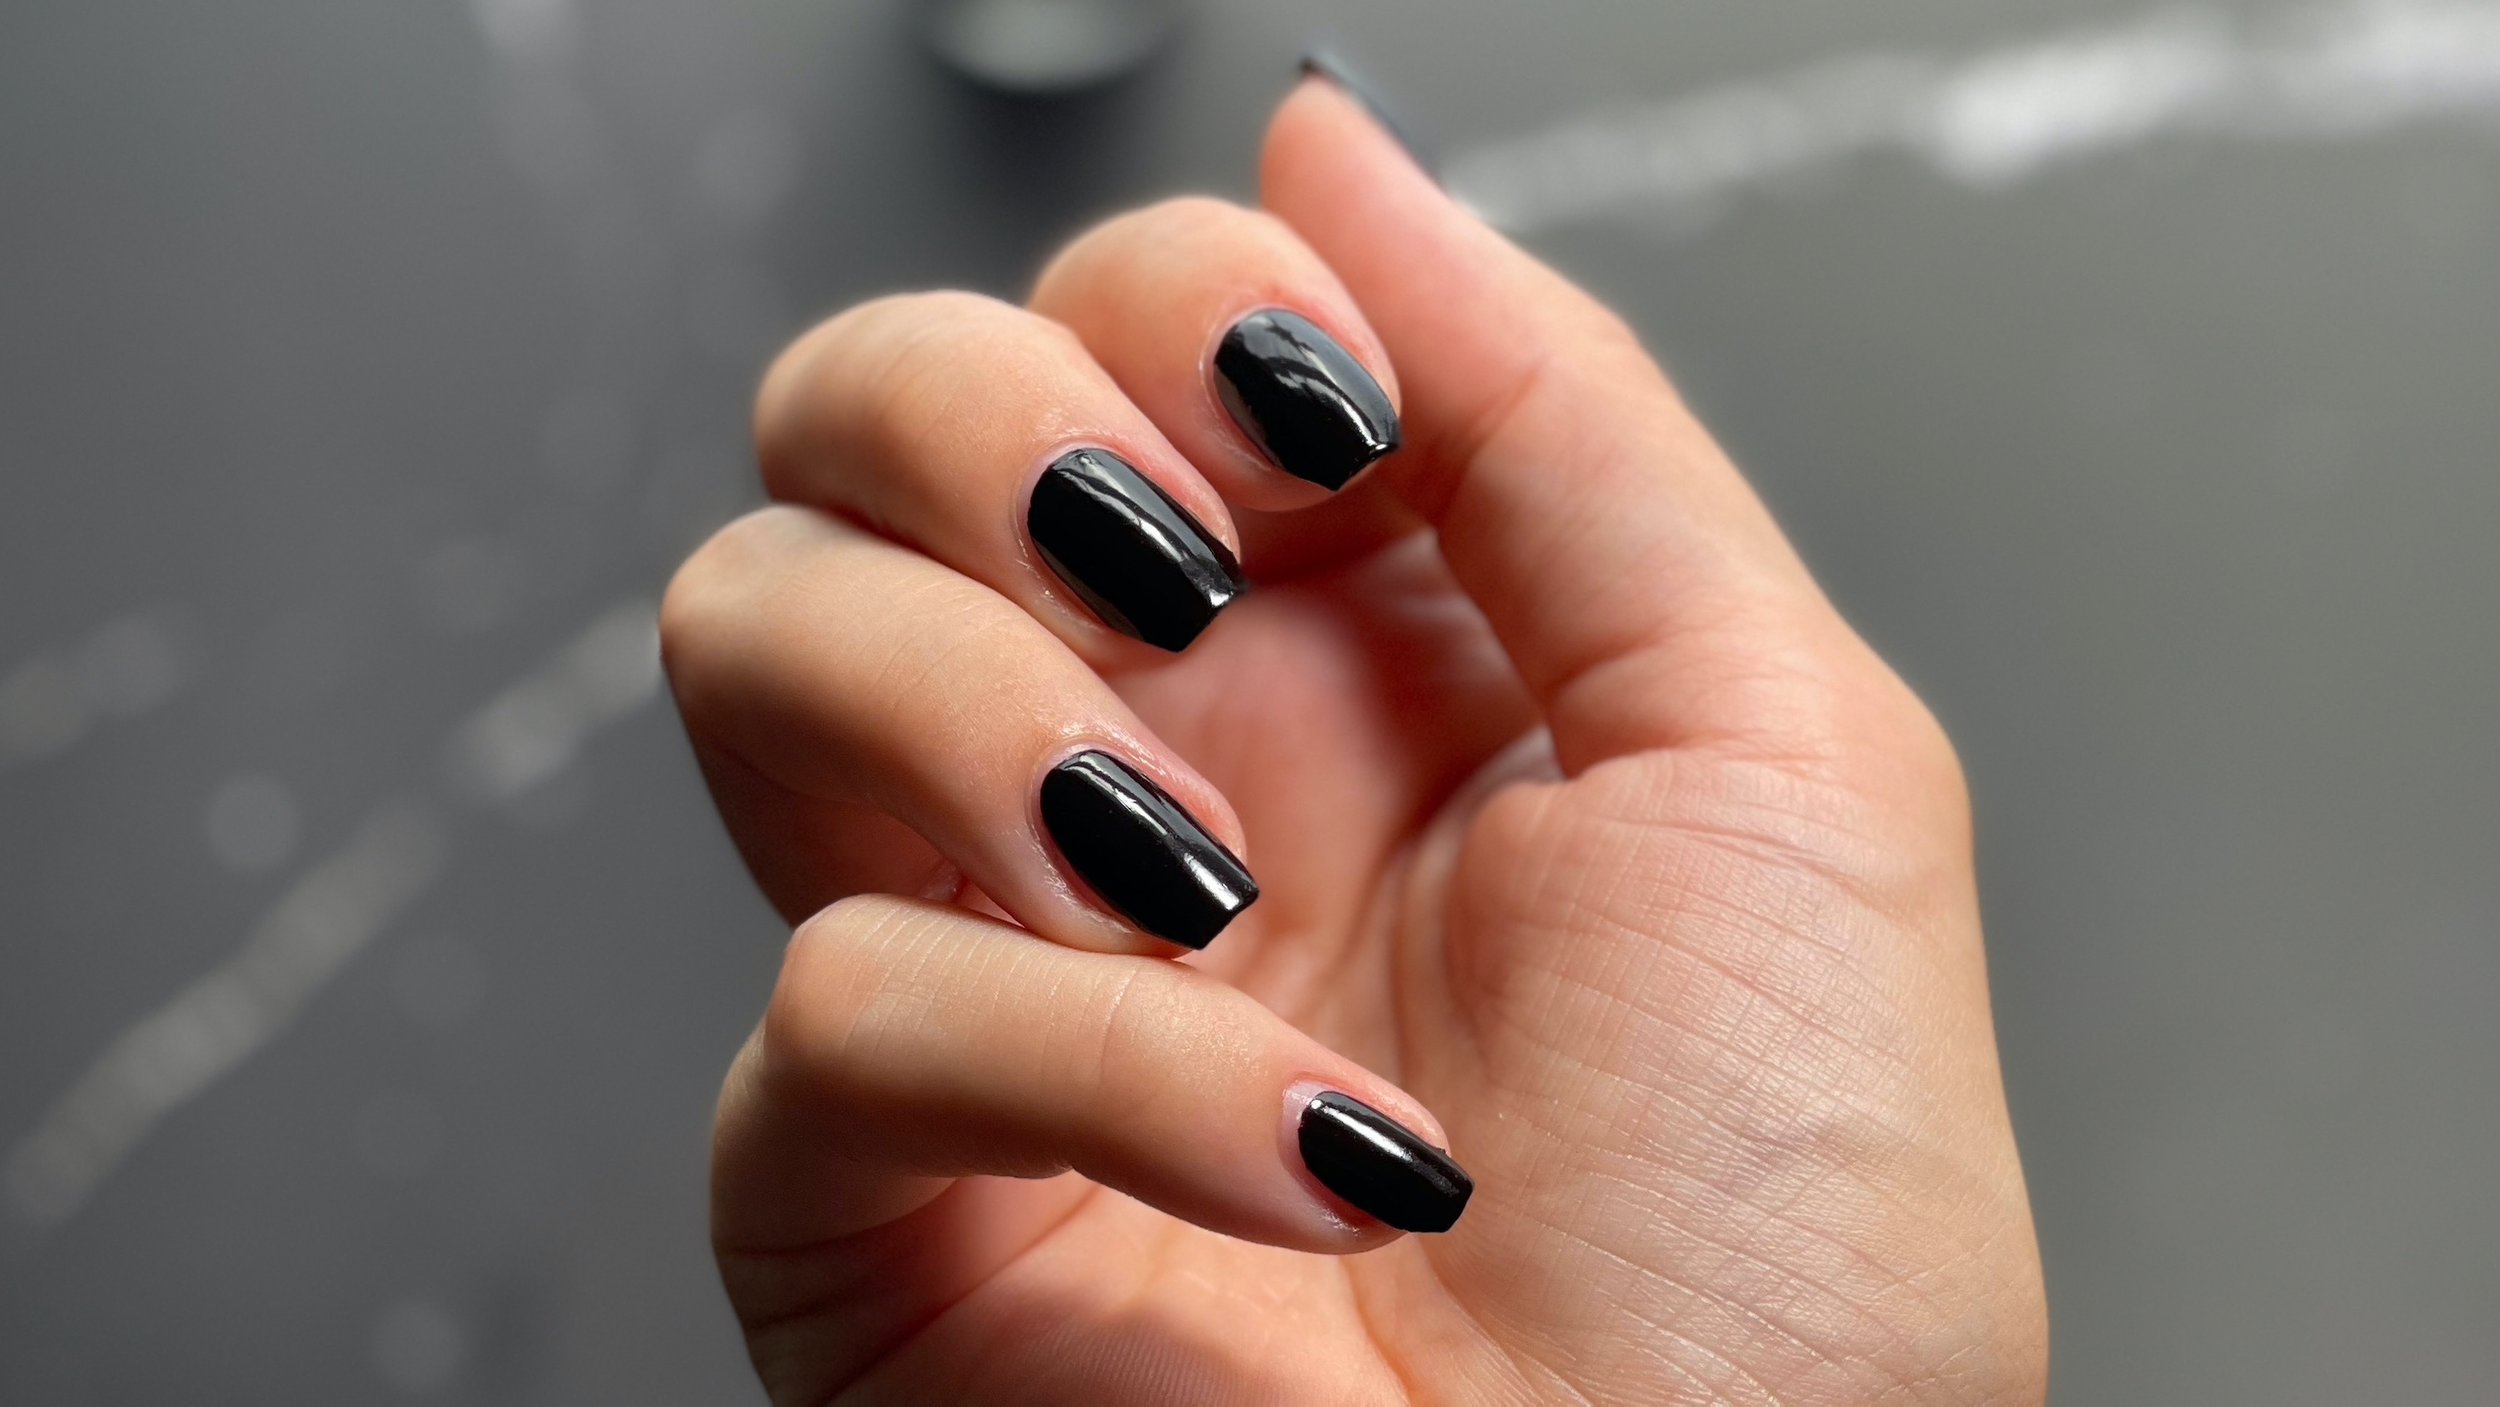 3. OPI Nail Lacquer in "Lincoln Park After Dark" - wide 2